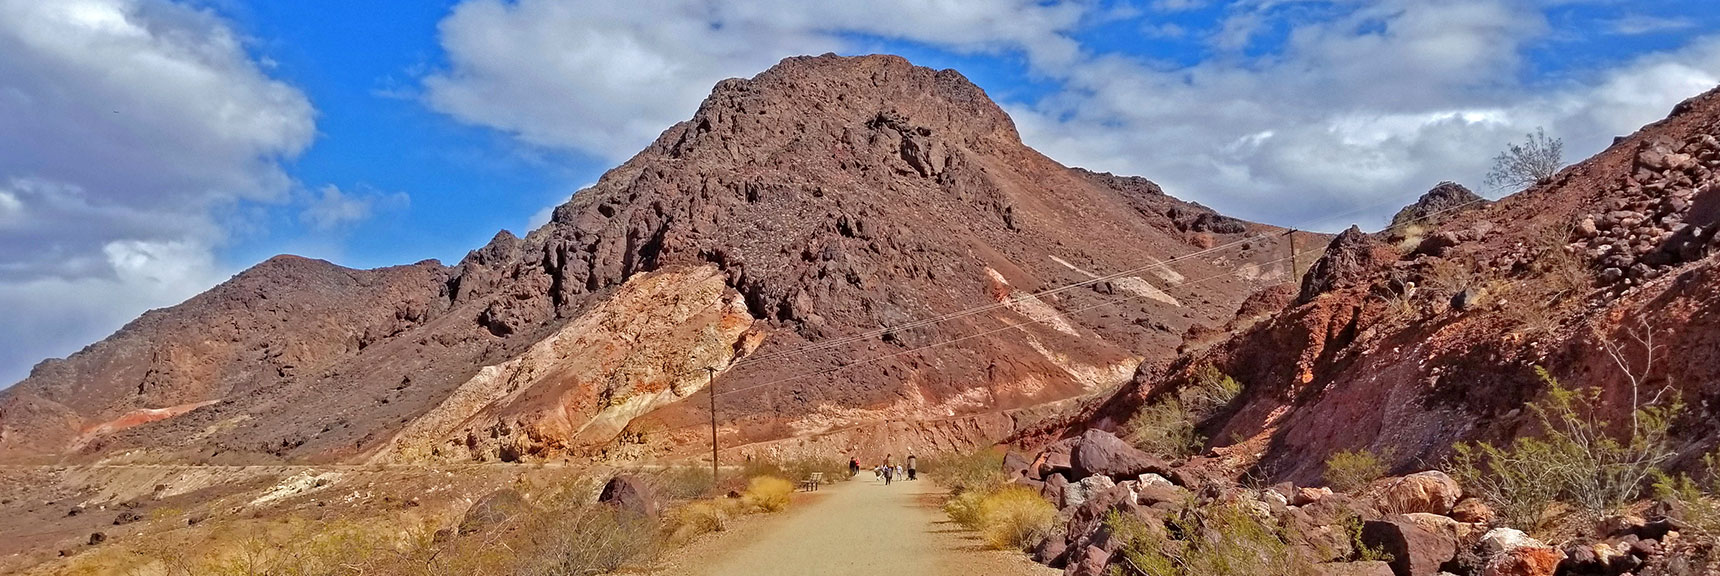 The Gradually Graded Wide Railroad Bed is an Easy Hike for All Ages | Historic Railroad Trail | Lake Mead National Recreation Area, Nevada